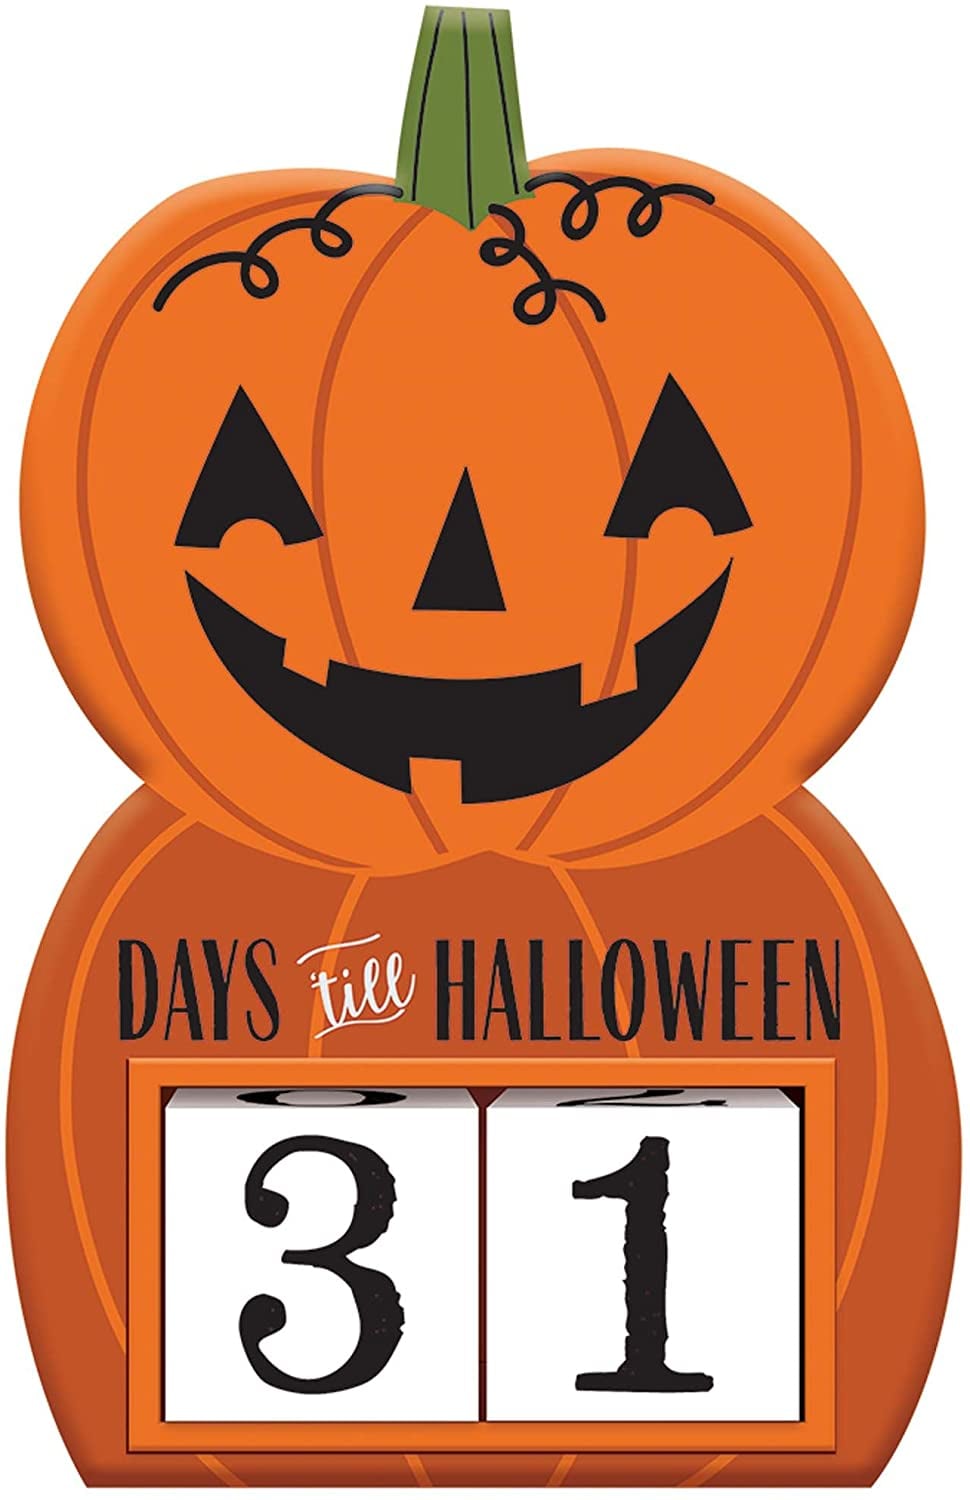 How many weeks in till halloween  gail's blog